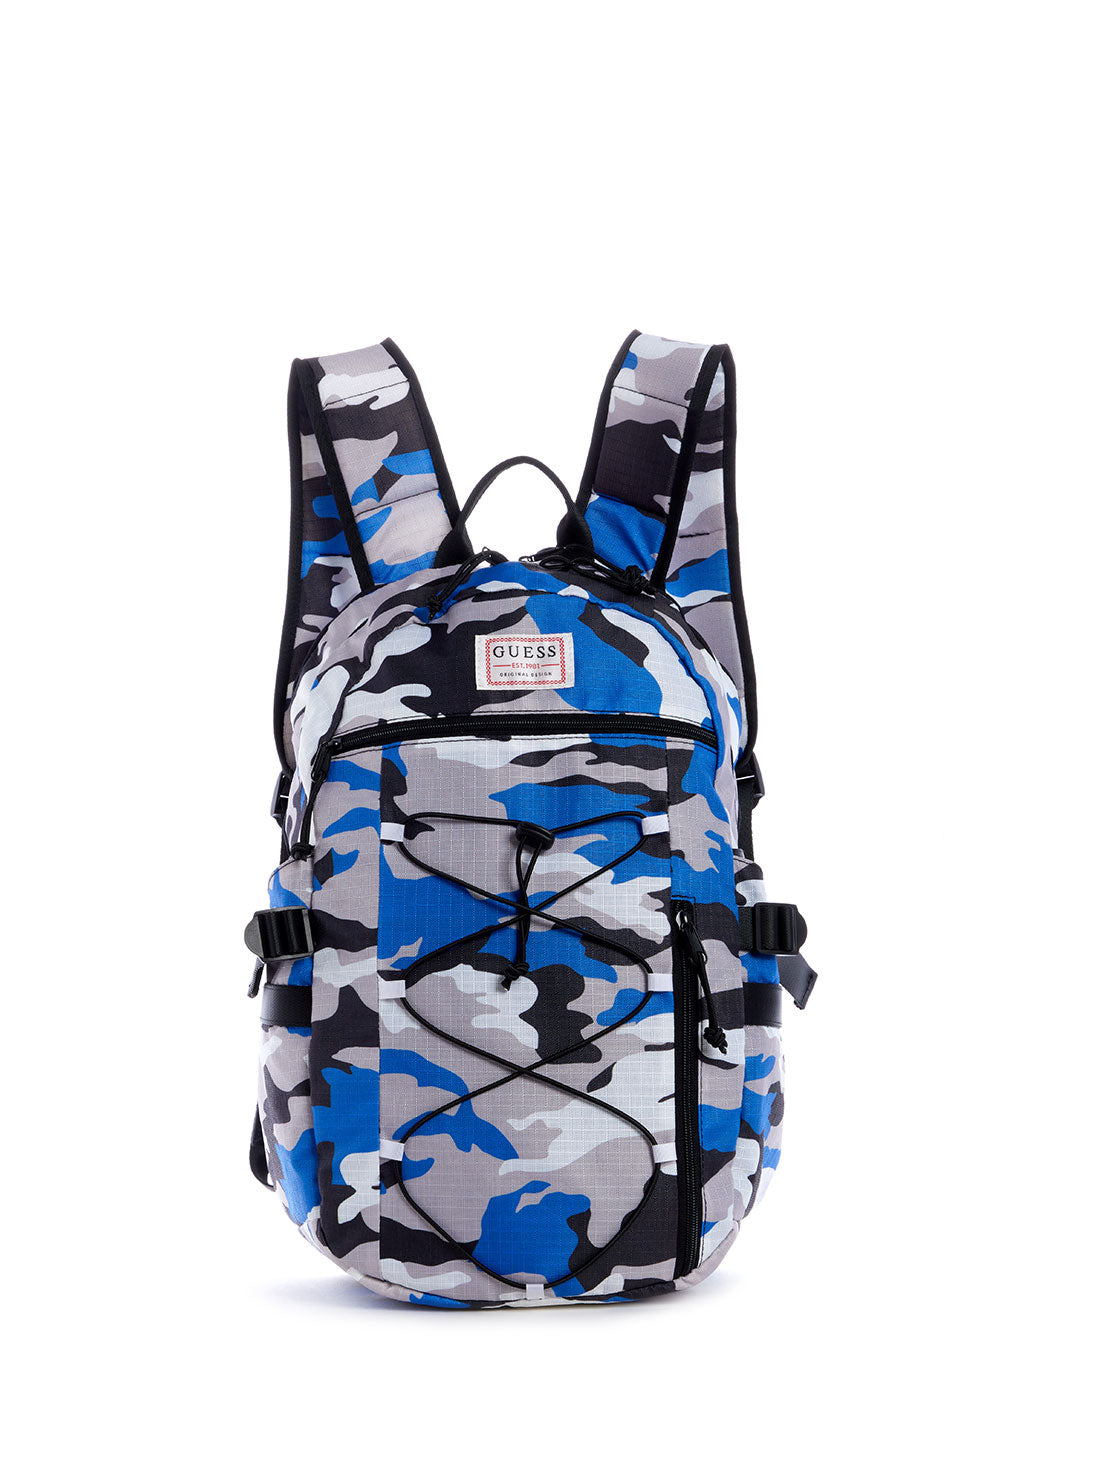 GUESS Mens Blue Camo Expedition Backpack PO835798 Front View